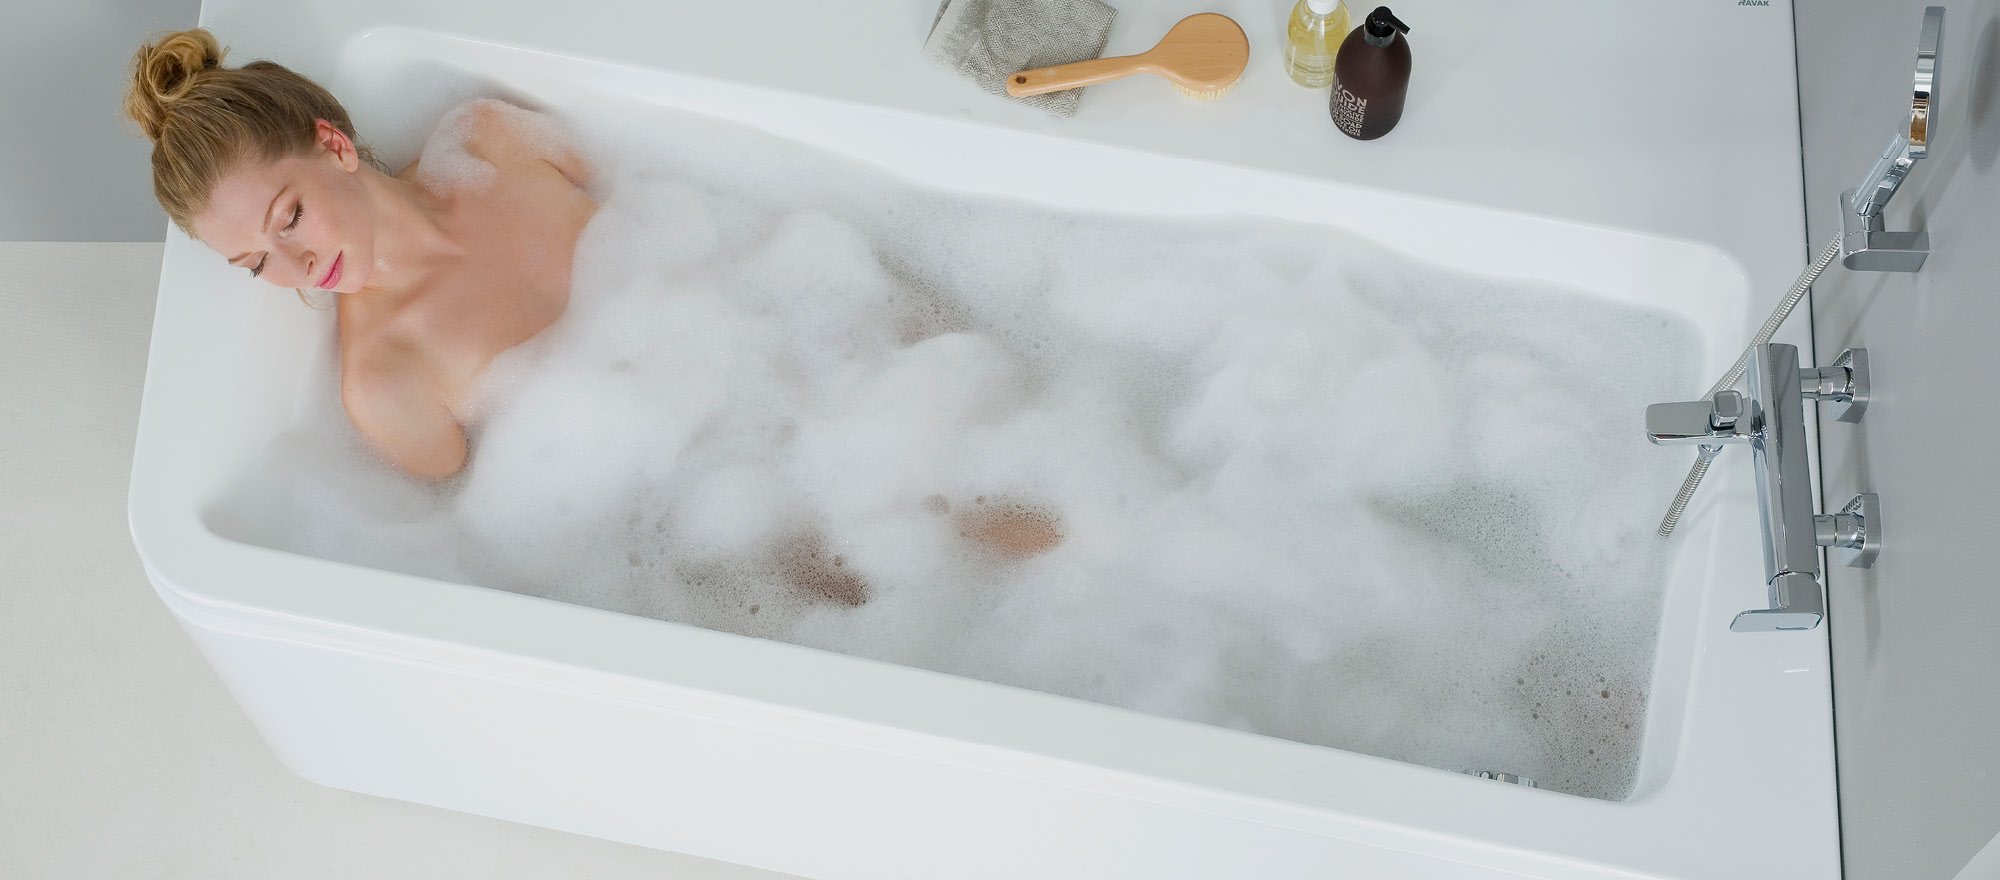 How to choose a bathtub to be satisfied even after years